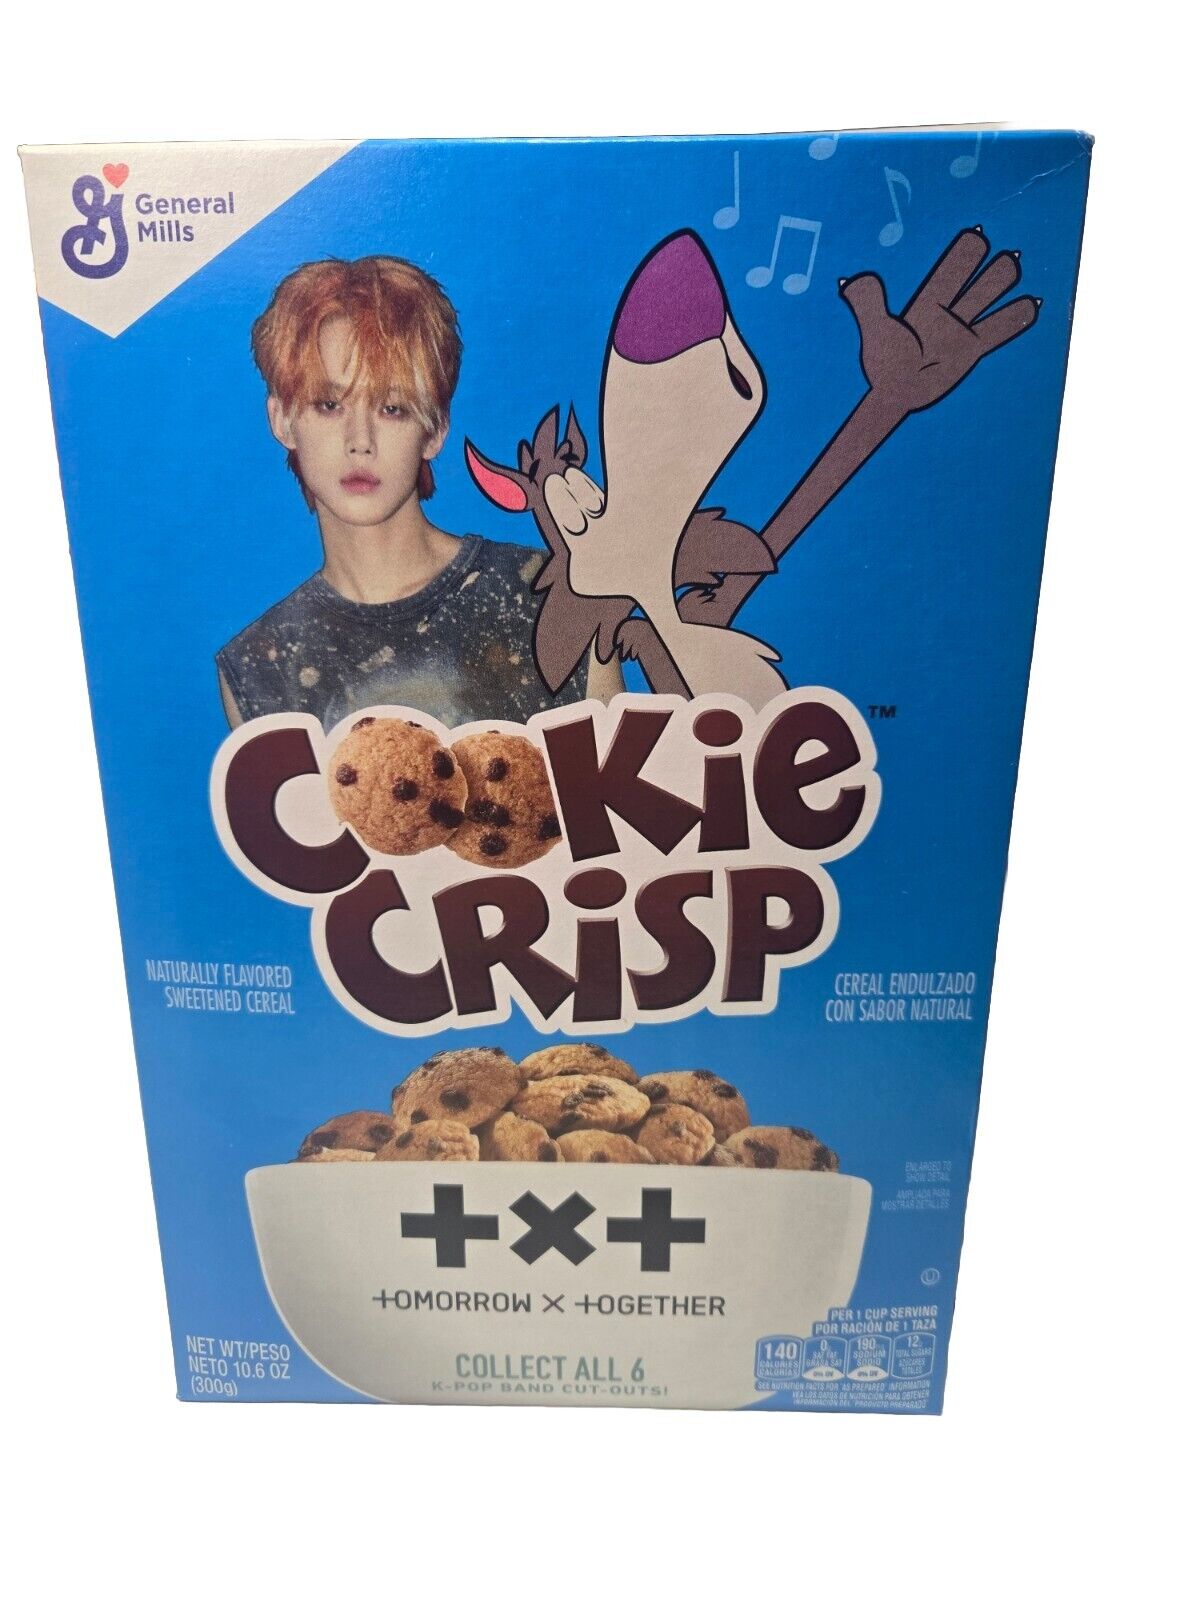 Cookie Crisp Cereal K-Pop Yeonjun Txt Tomorrow X Together Limited Edition 10.6oz